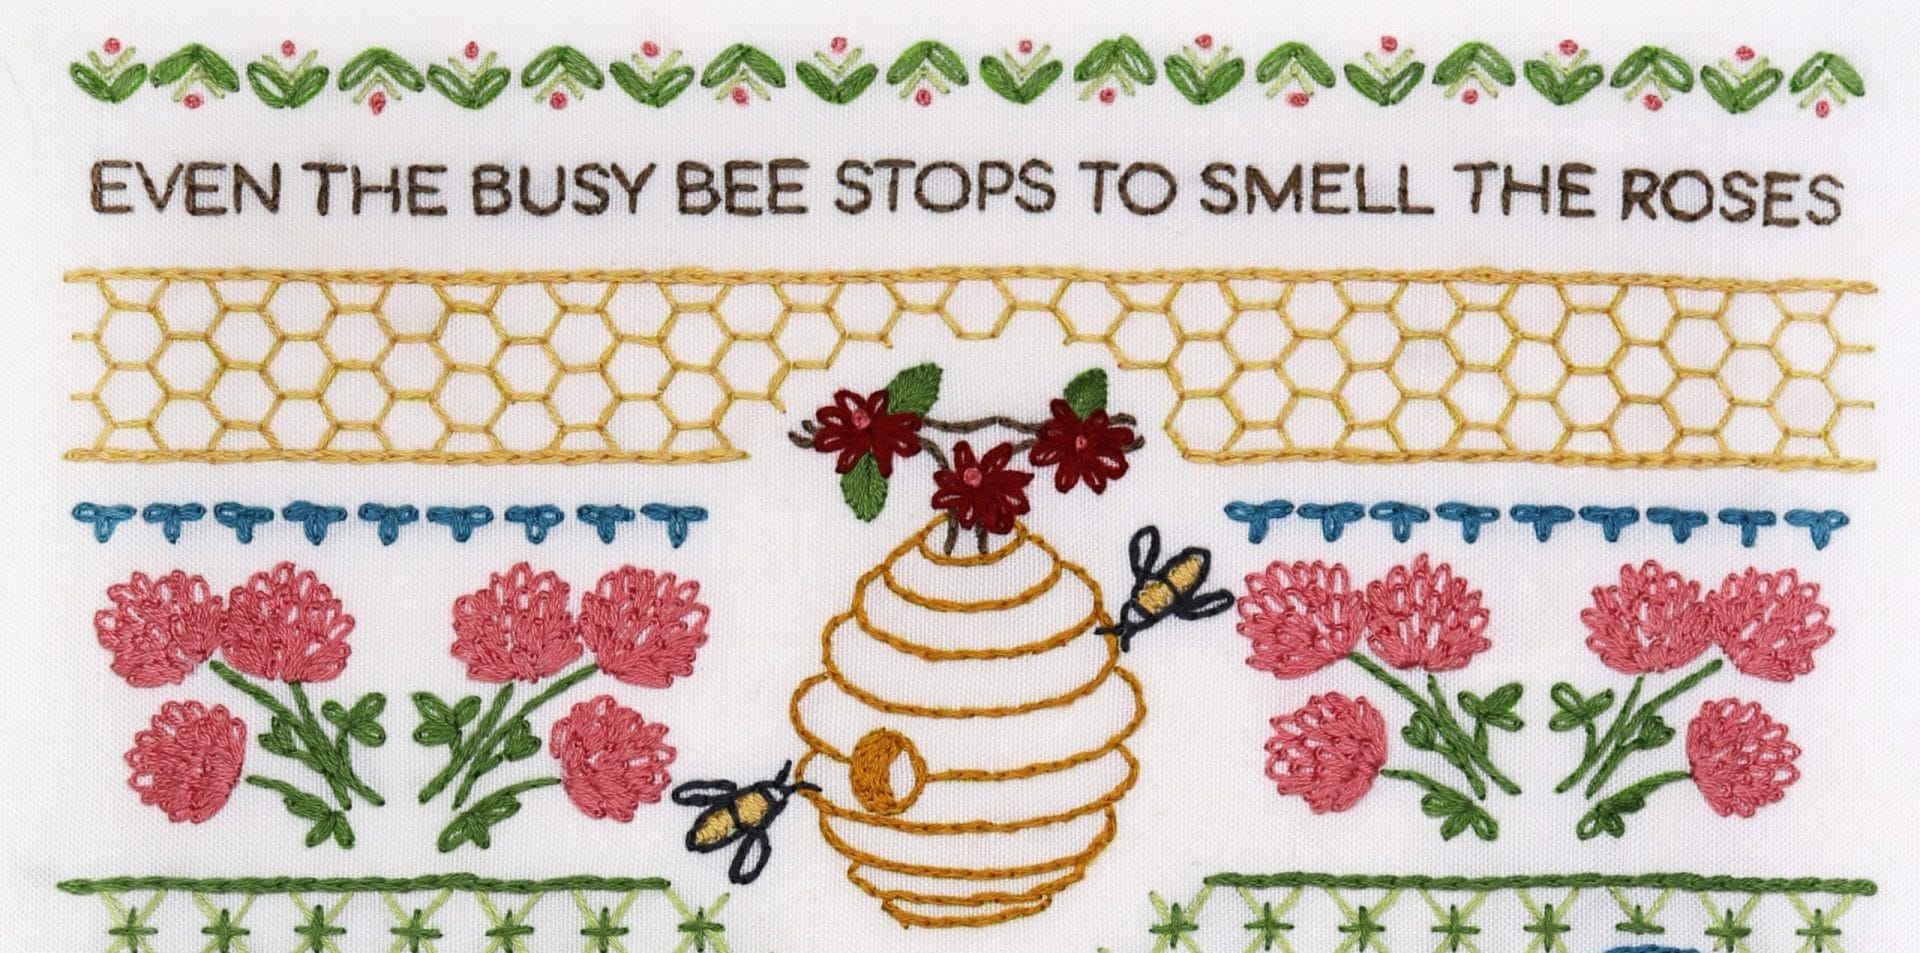 Embroidered detail from traditional embroidery stitch sampler with honeybee themes